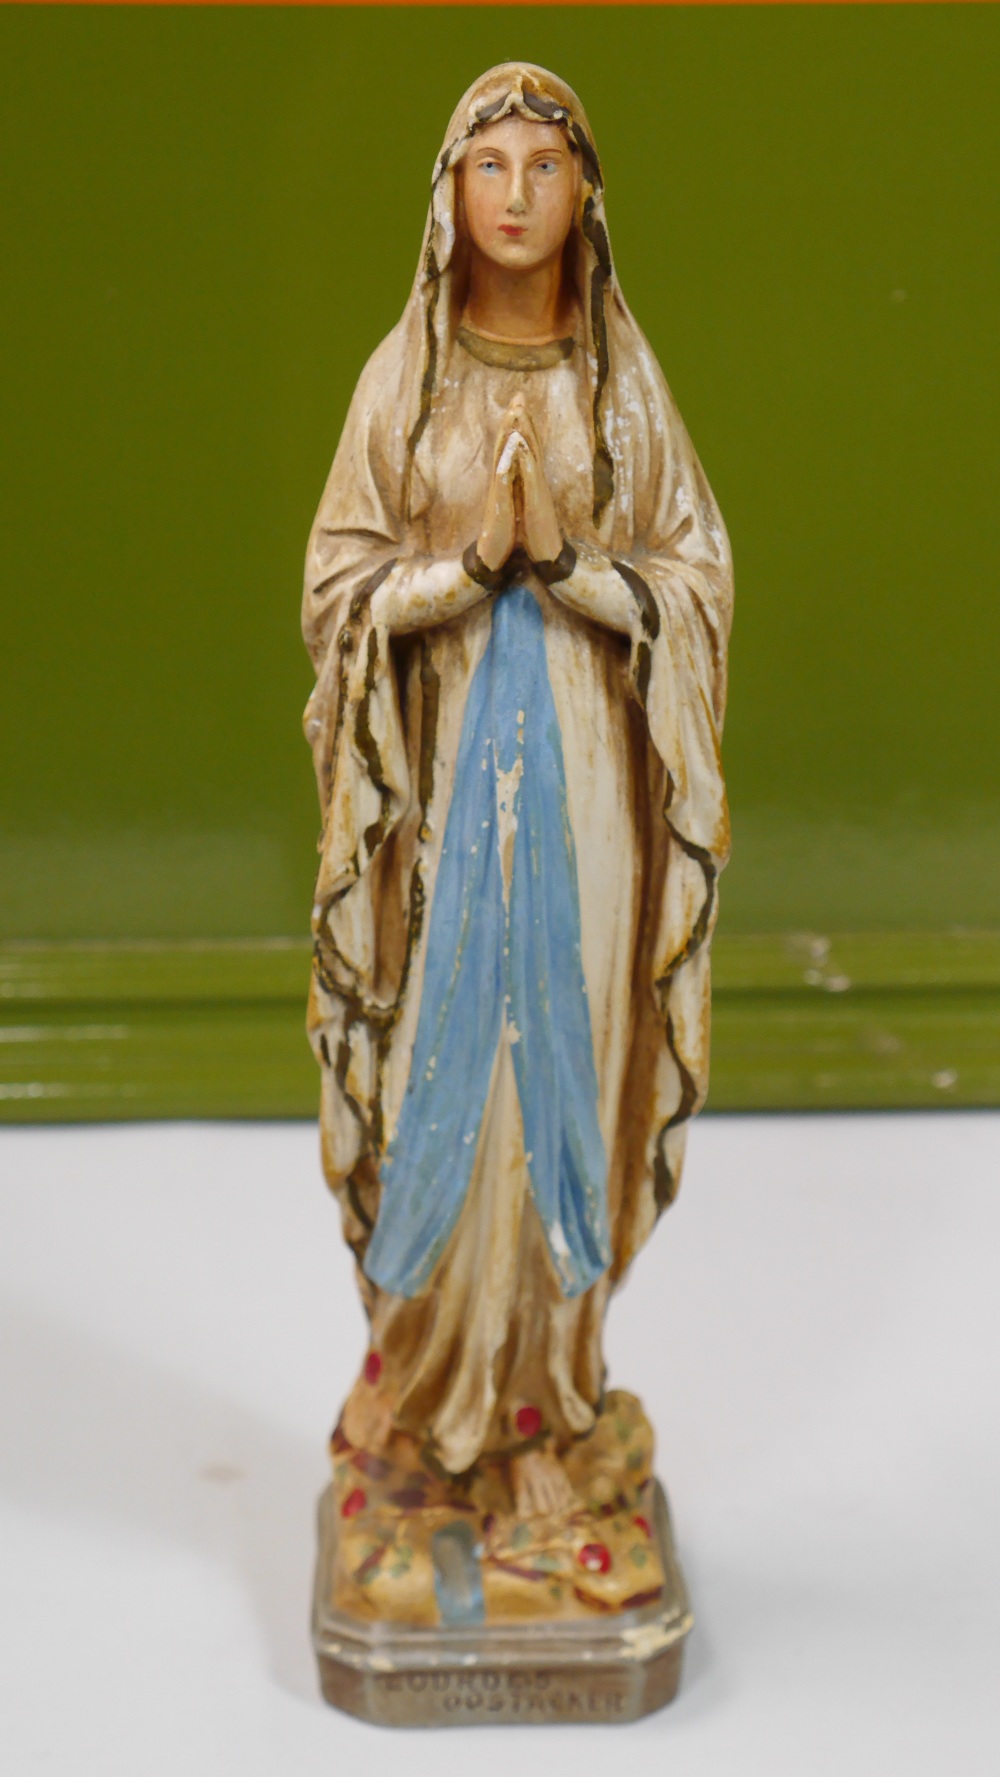 Virgin Mary Our Lady of Lourdes Oostakker Bisque Porcelain Religious Statue